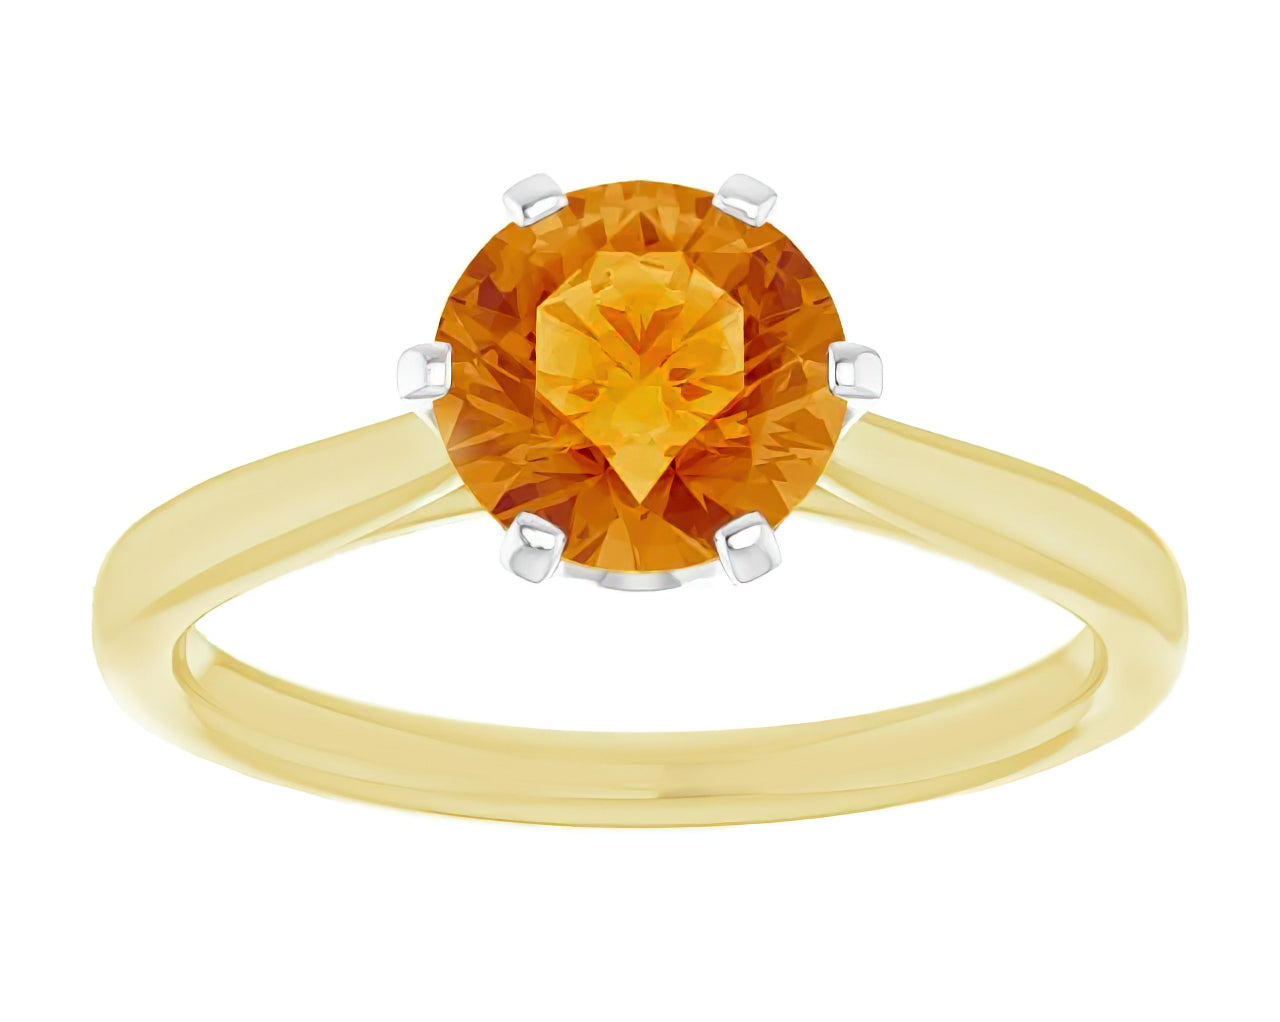 Heirloom Crown Citrine Solitaire Engagement Ring in 14 Karat Yellow and White Gold Mixed Metals - Item: R102 - Image: 4